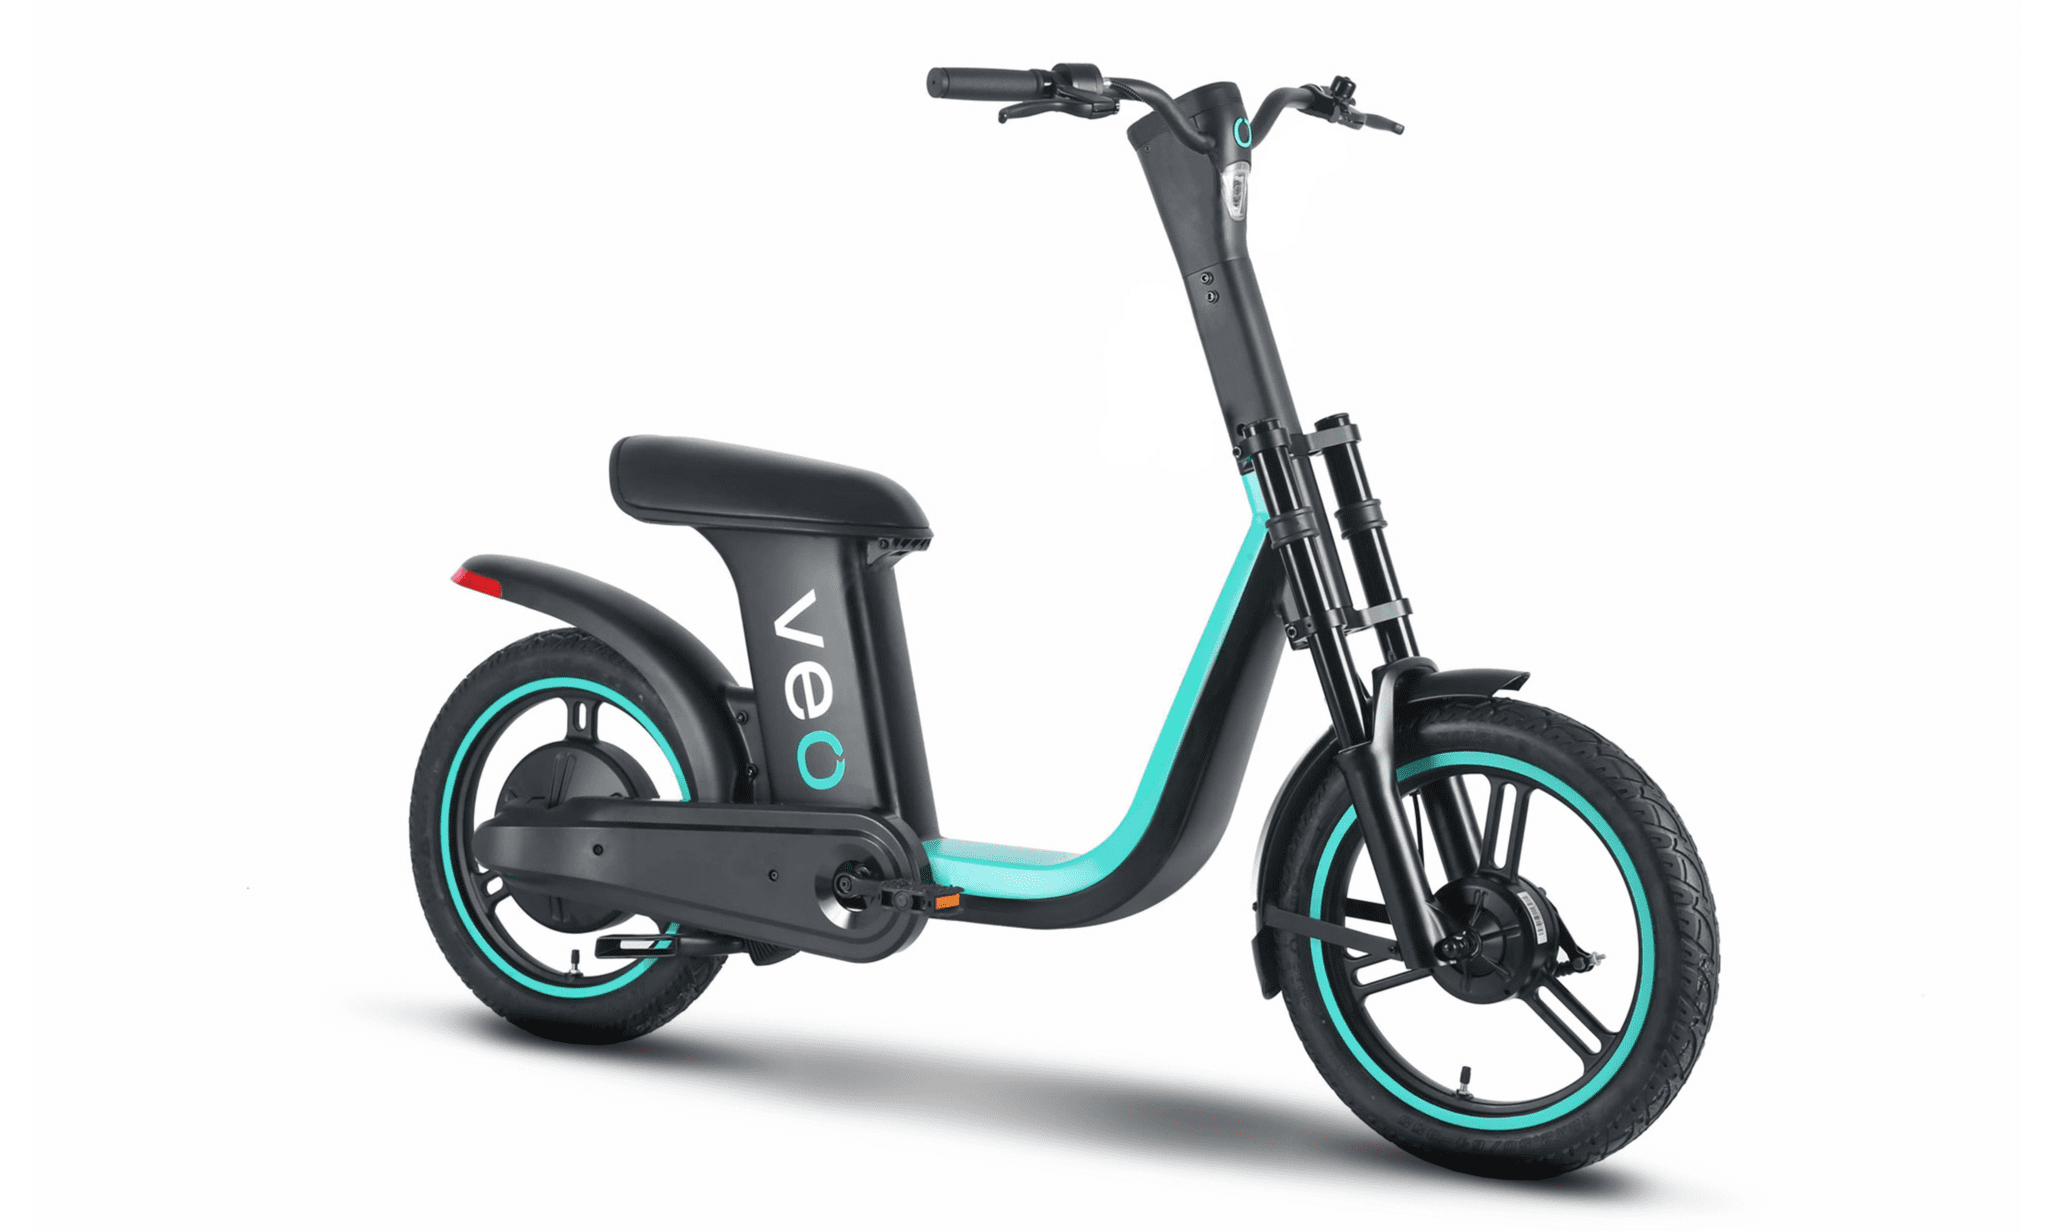 Image of a Veo e-bike. Veo is a new bike share company arriving to Seattle. A black e-bike is shown with a white background. Light blue coloring is also visible on parts of the bike, including the wheels, frame, and part of the company logo.